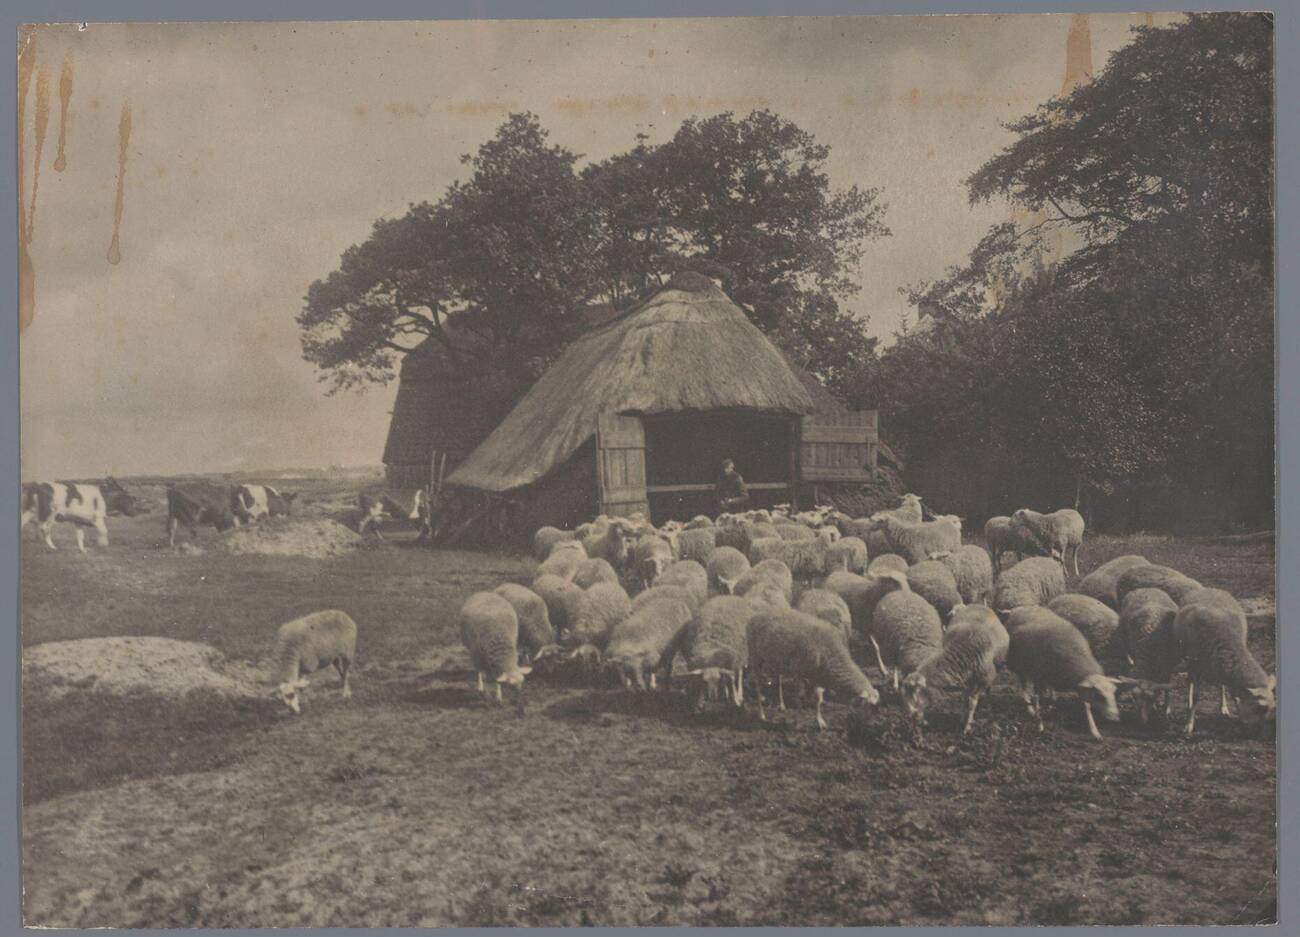 The Sheepfold Landscape with sheep, cows, farmer and sheep farm, Netherlands, 1900